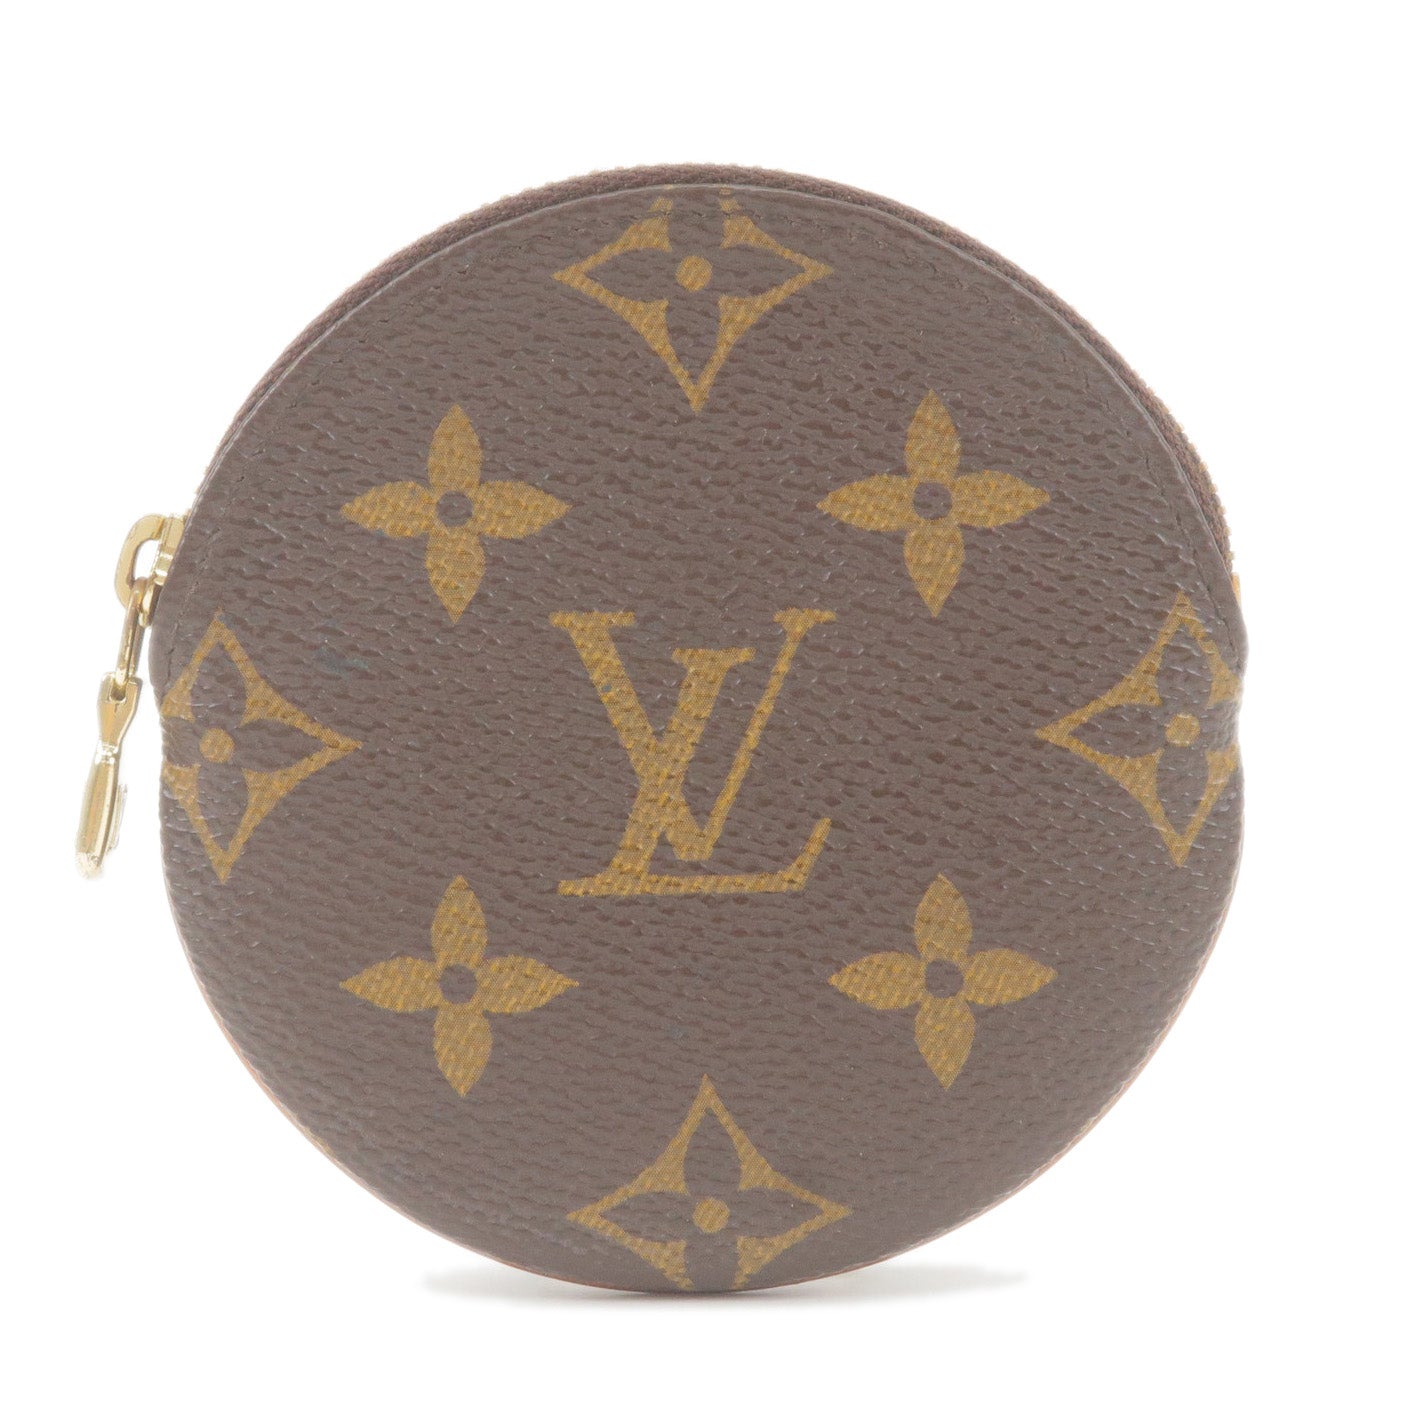 Authenticated Used Louis Vuitton Monogram Vernis Multicle 4 Key